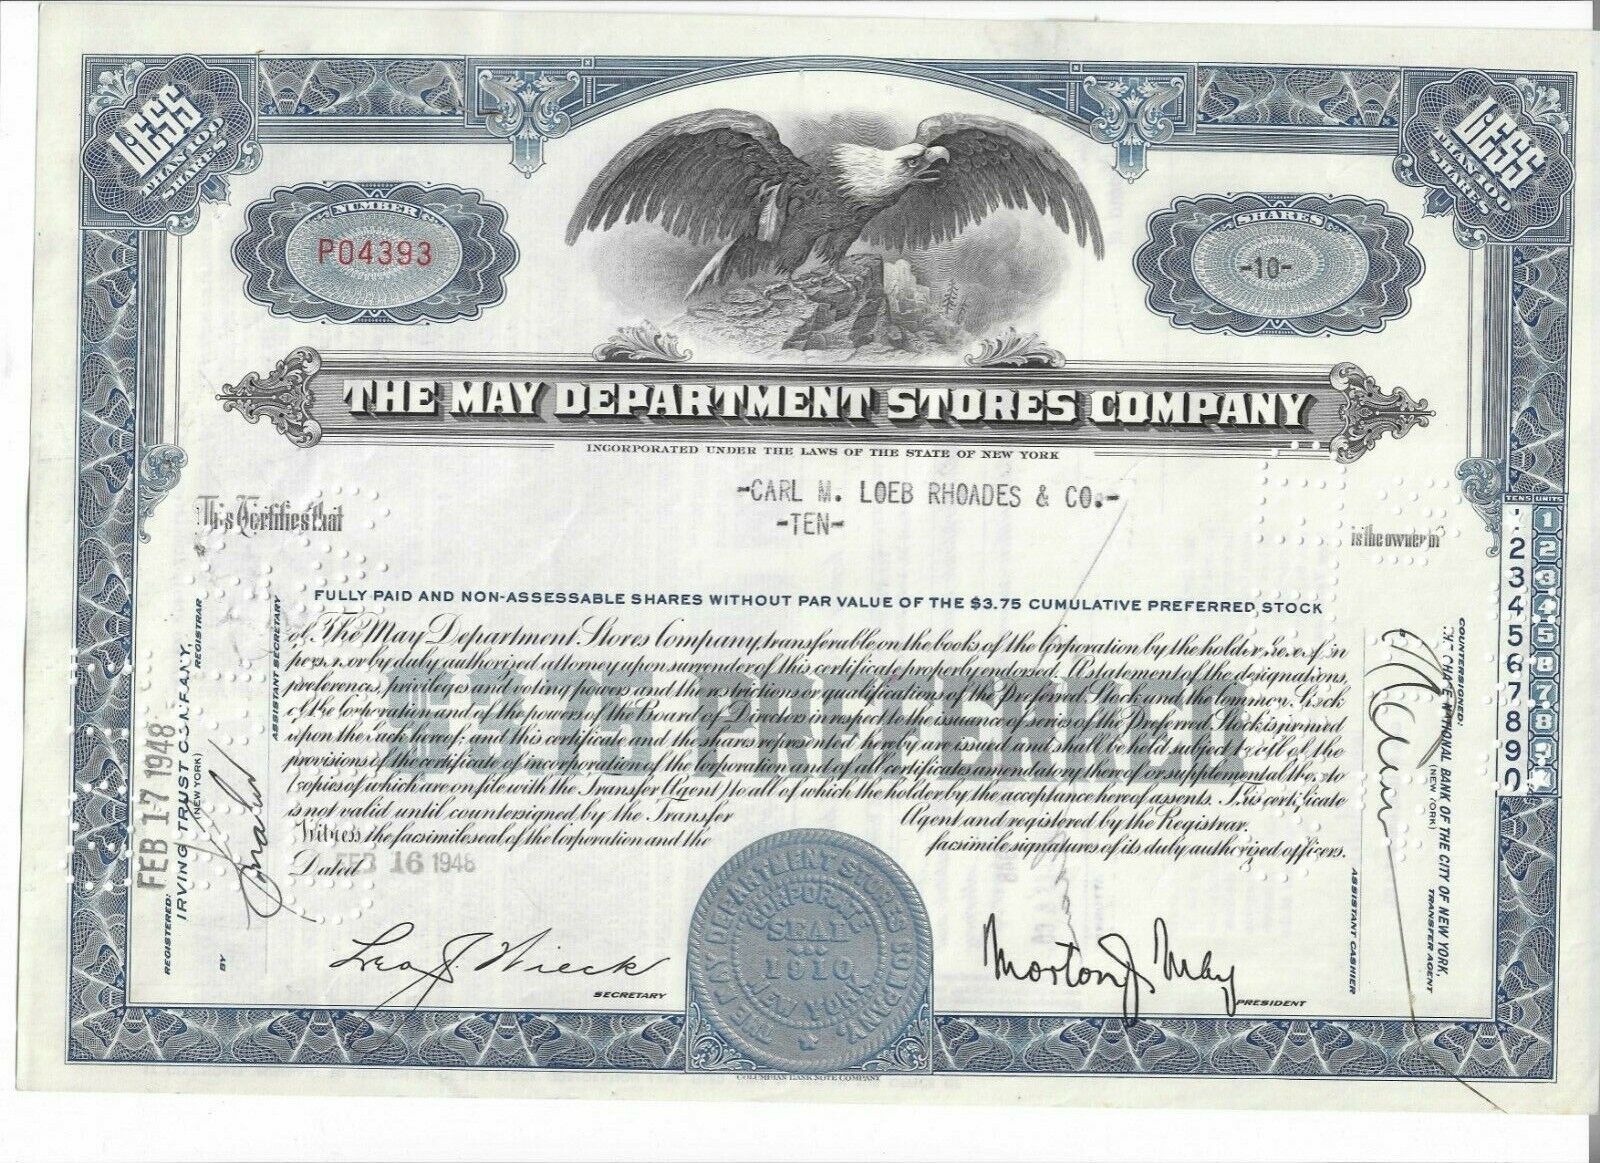 The May Company Stock Certificate Vintage 1948 Carl M Loeb Rhoades & Co.